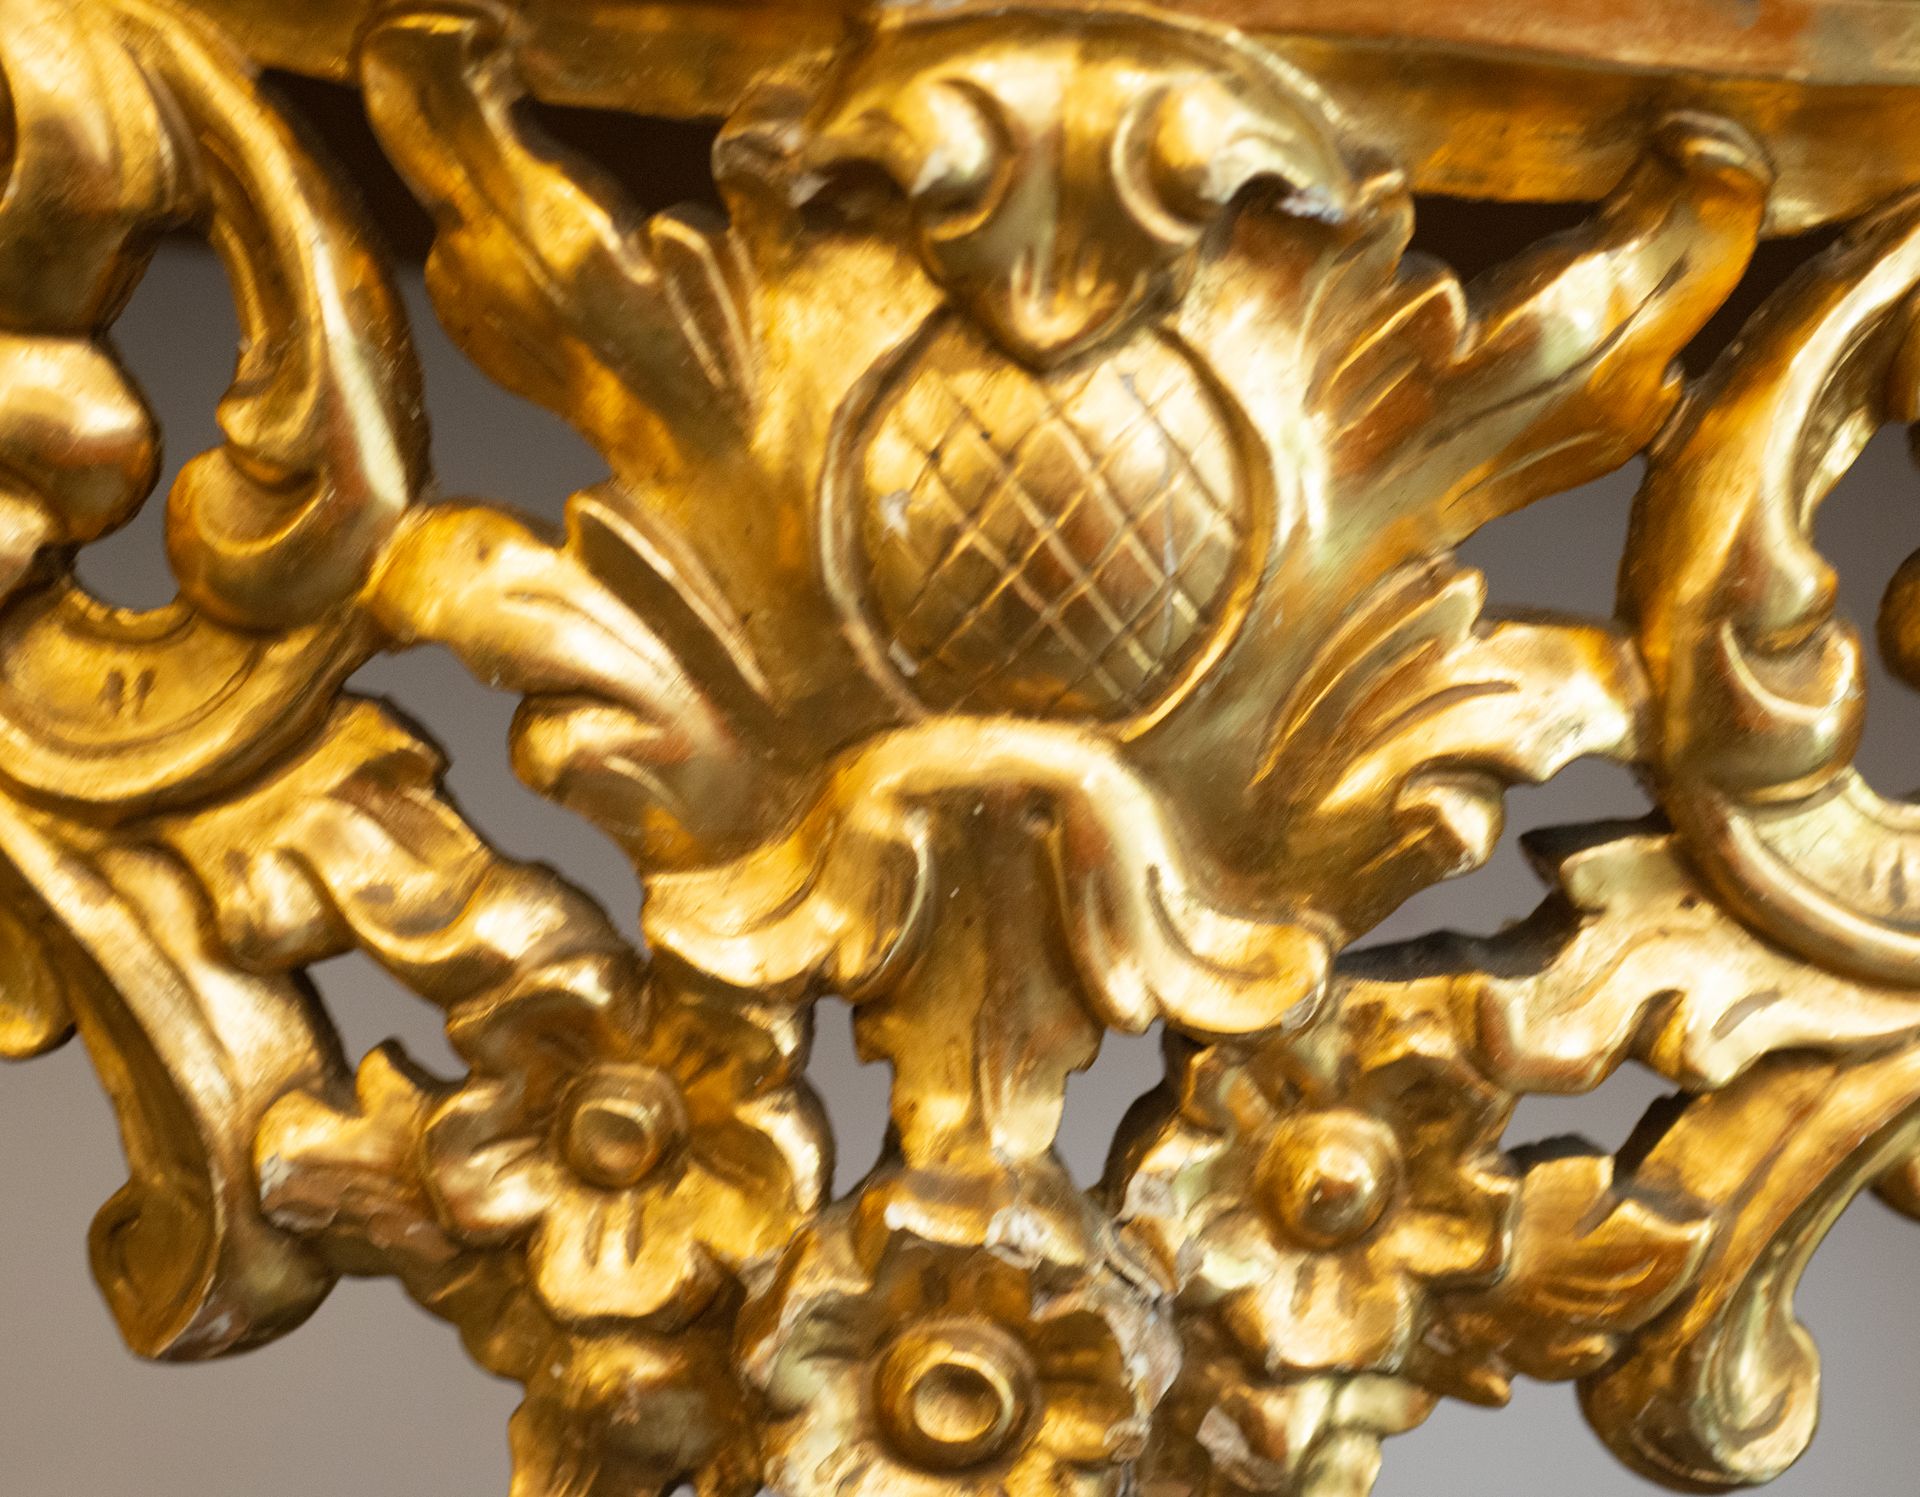 Italian console in gilt wood with gold leaf, Italian school of the 19th century - Image 7 of 7